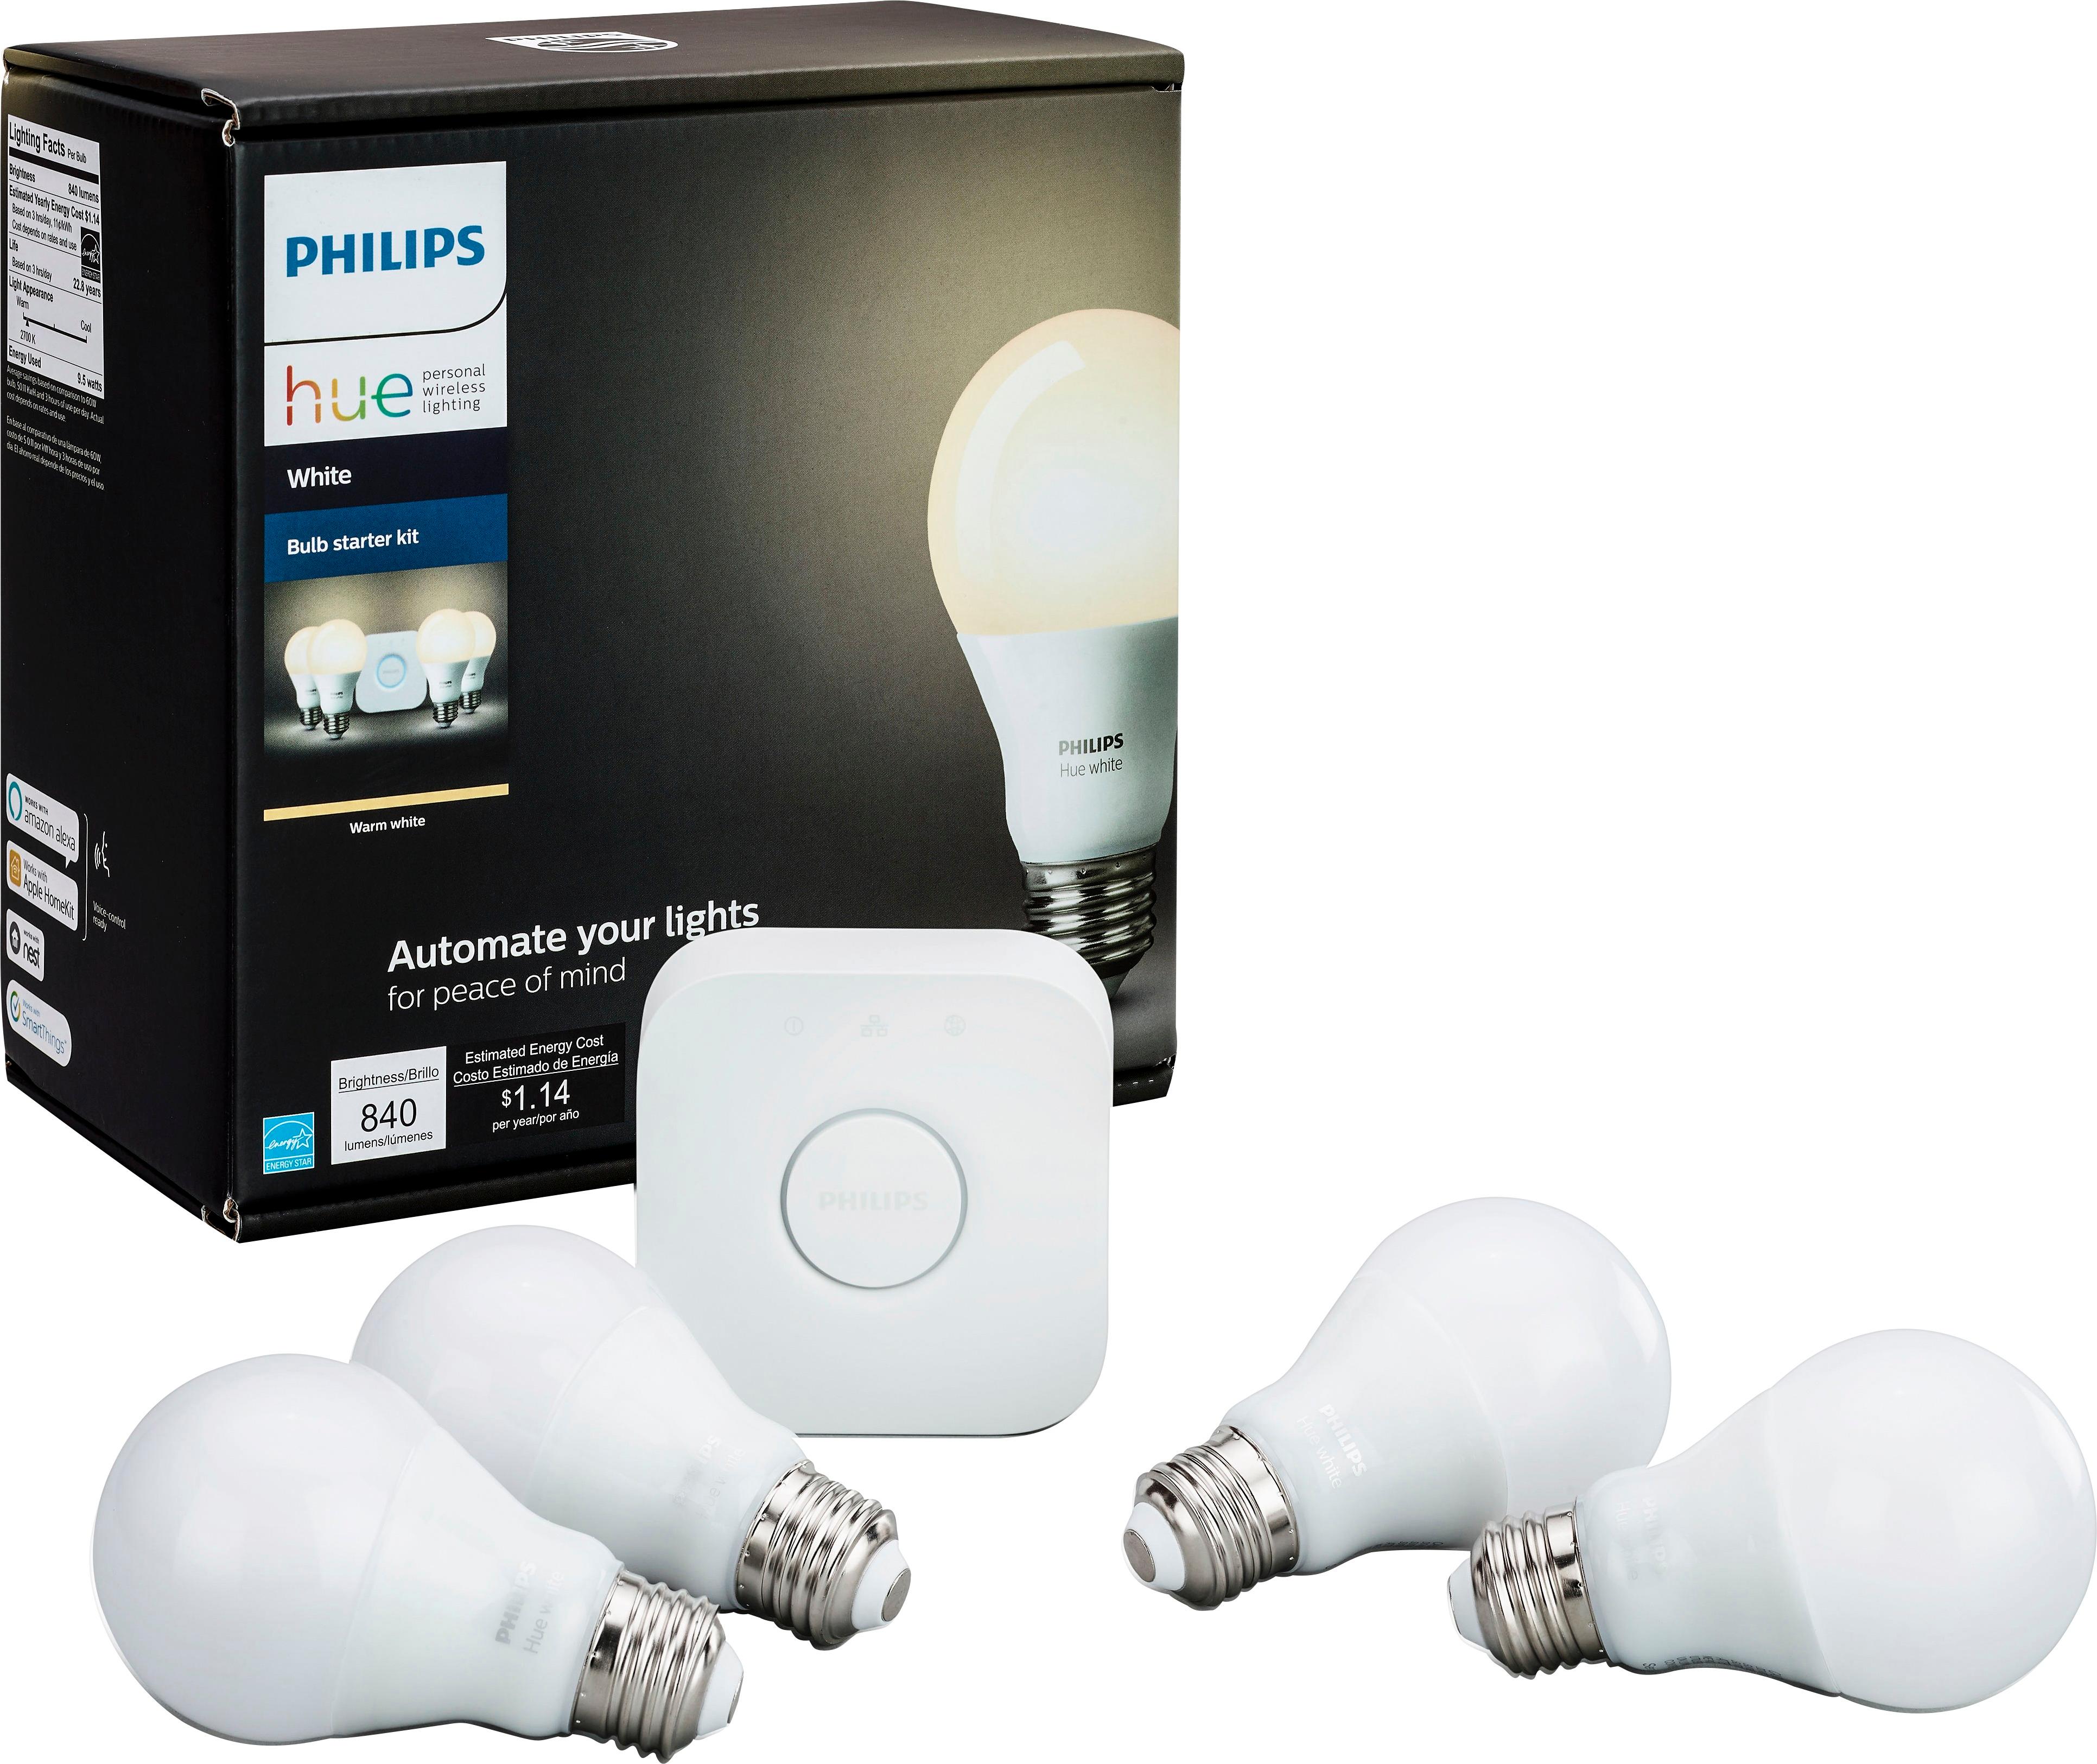 BRAND NEW - Open Box Details about   Philips Hue White and Color Starter Kit Hub 3 Bulbs A19 